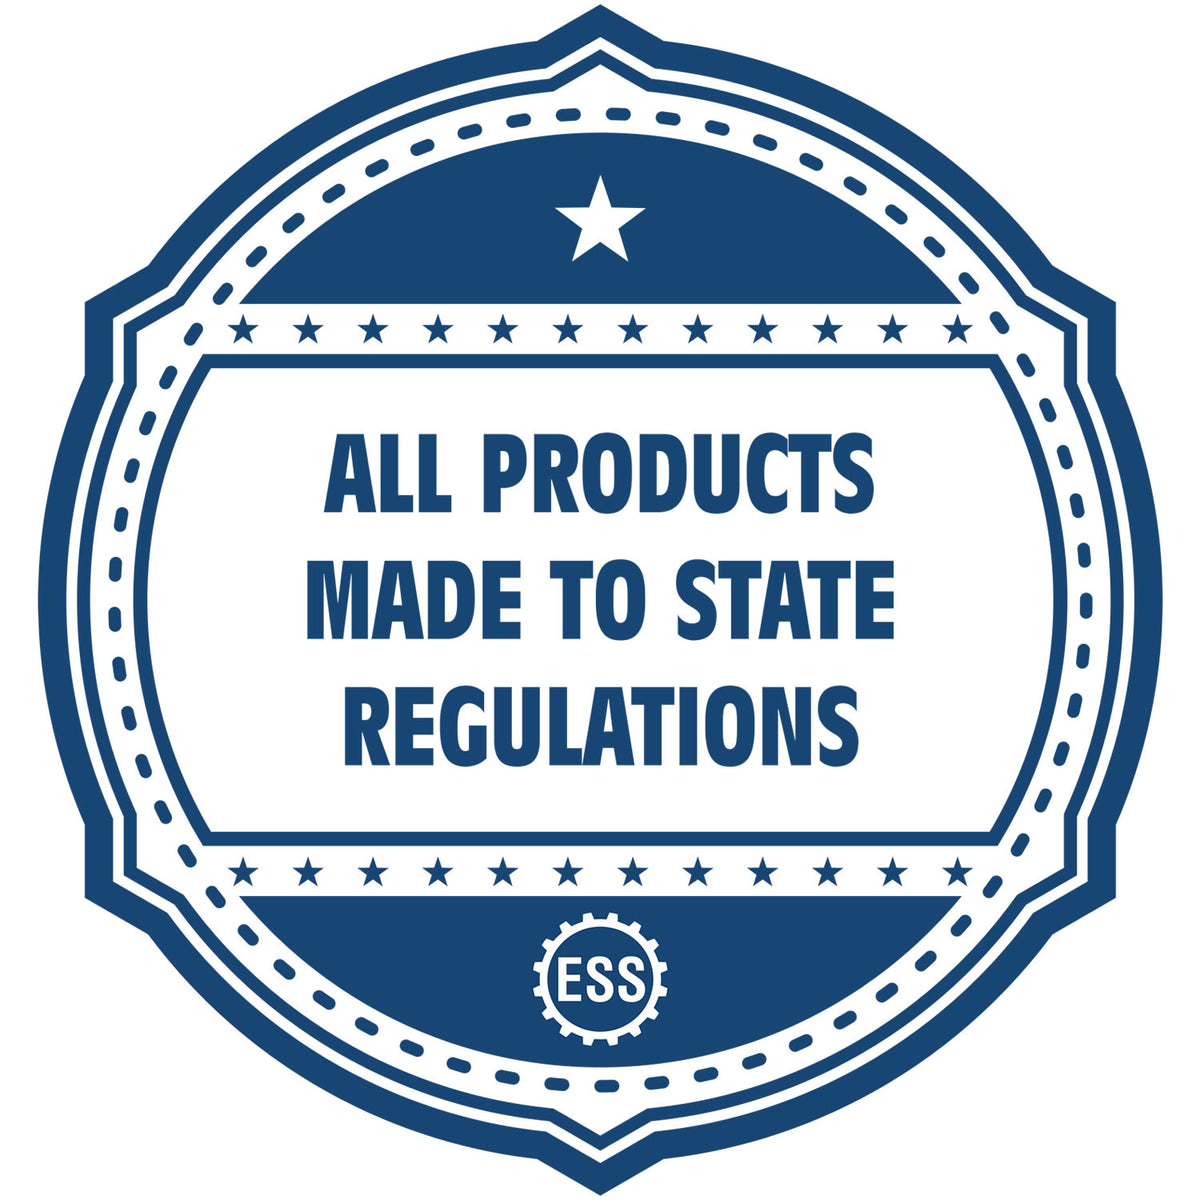 An icon or badge element for the State of Kentucky Architectural Seal Embosser showing that this product is made in compliance with state regulations.